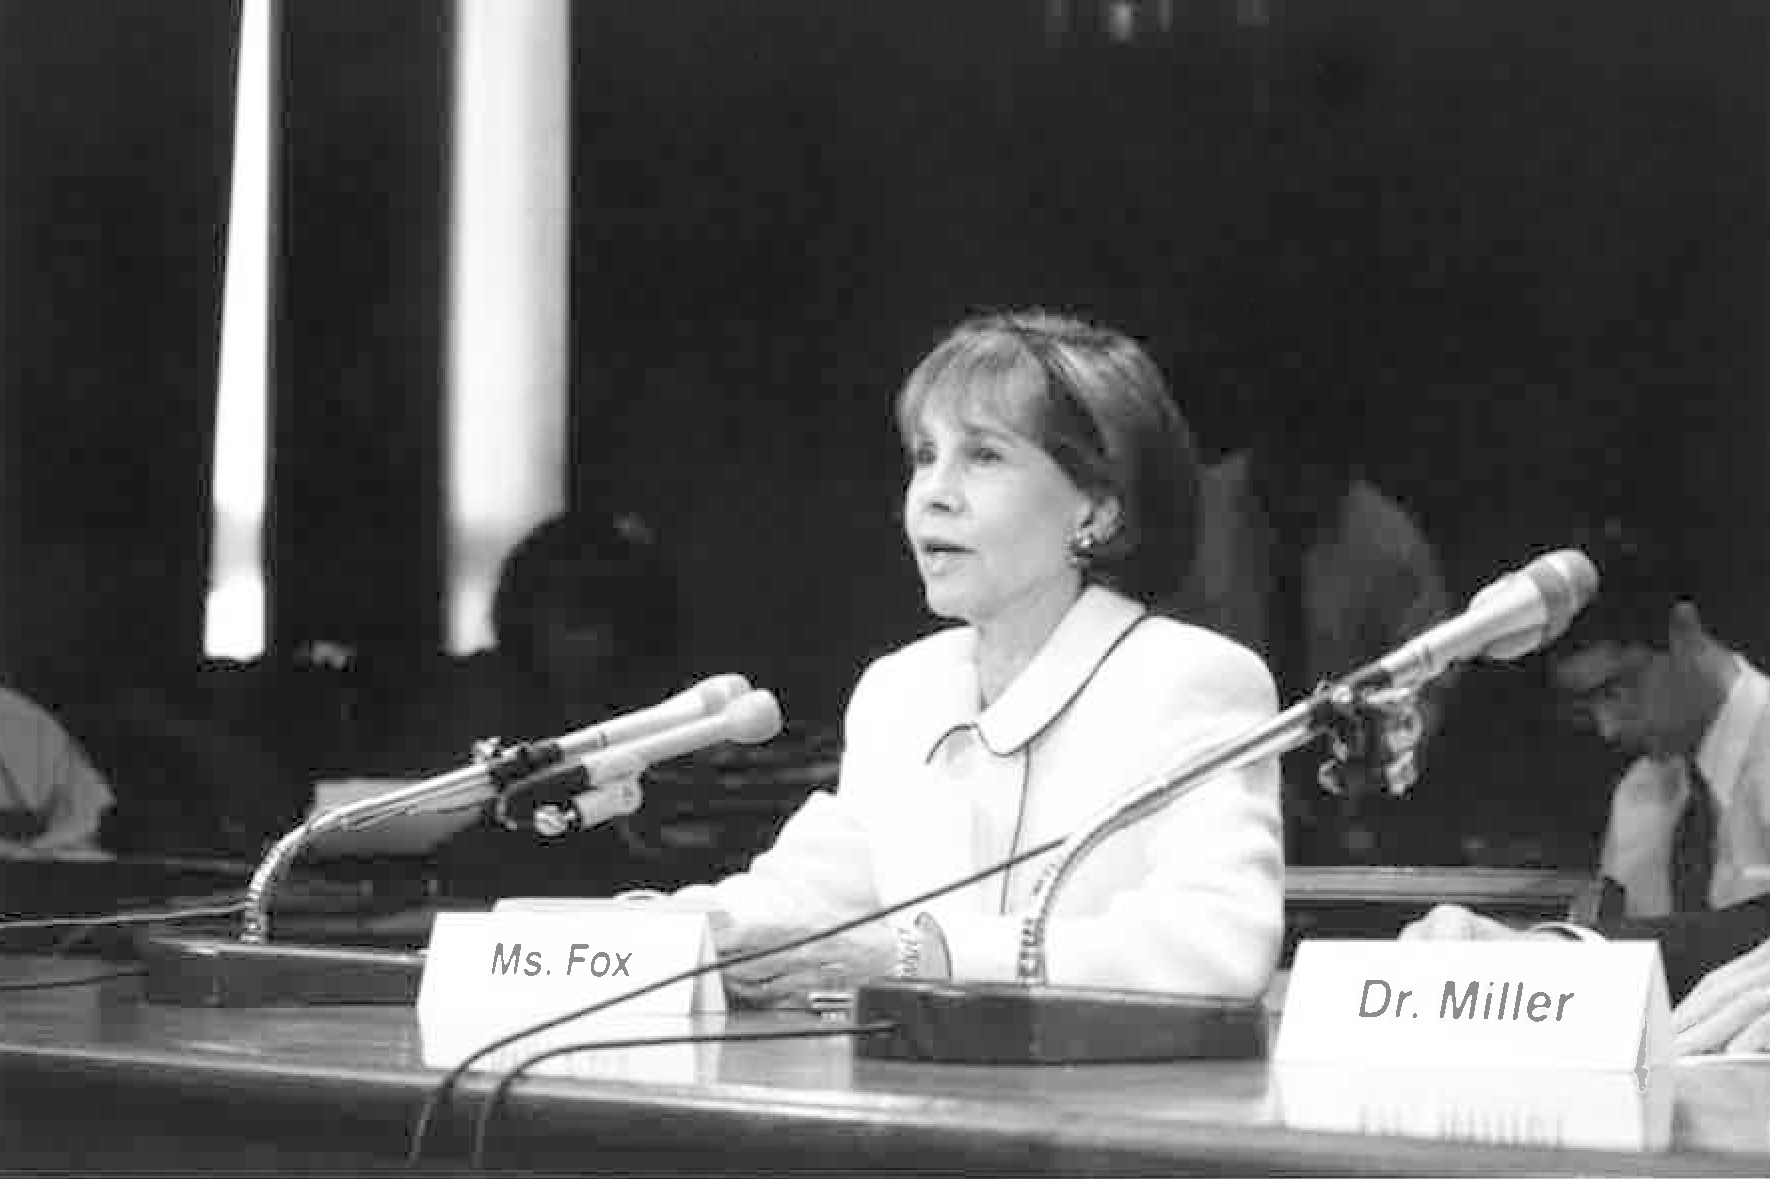 Ms. Fox sits, speaking into the microphone in front of her, at a conference table in a Congressional hearing room.